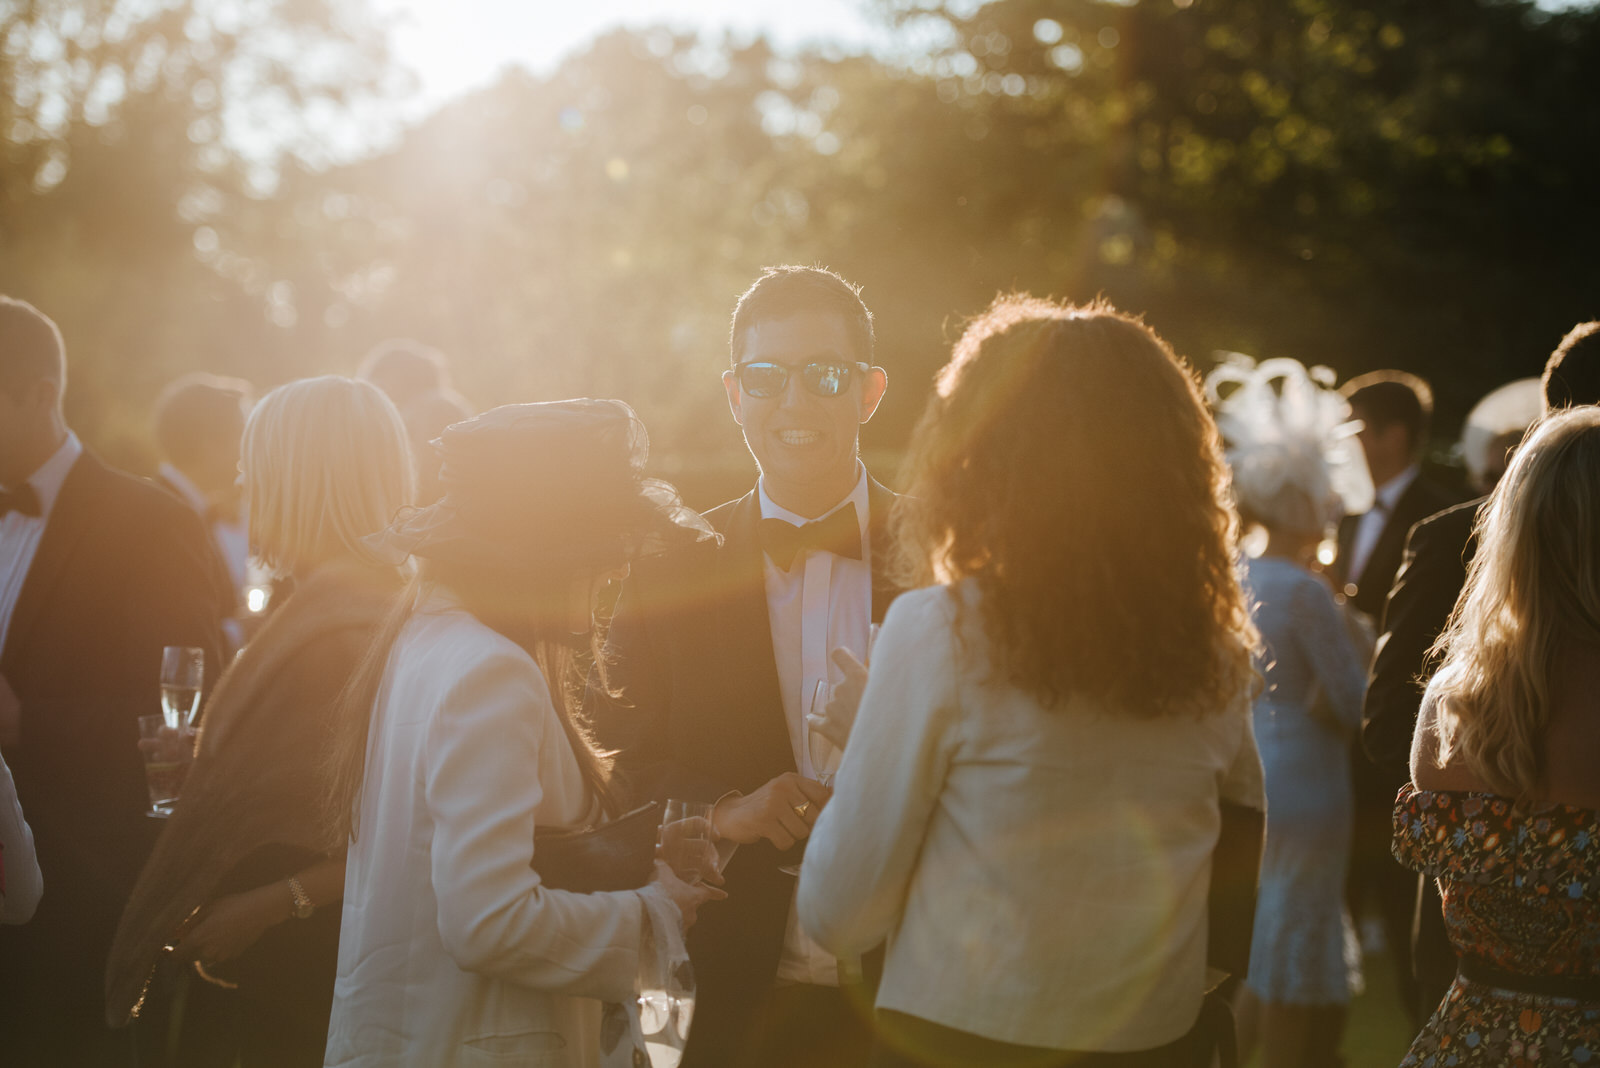 Sun-flare photo of guests talking to each other in garden